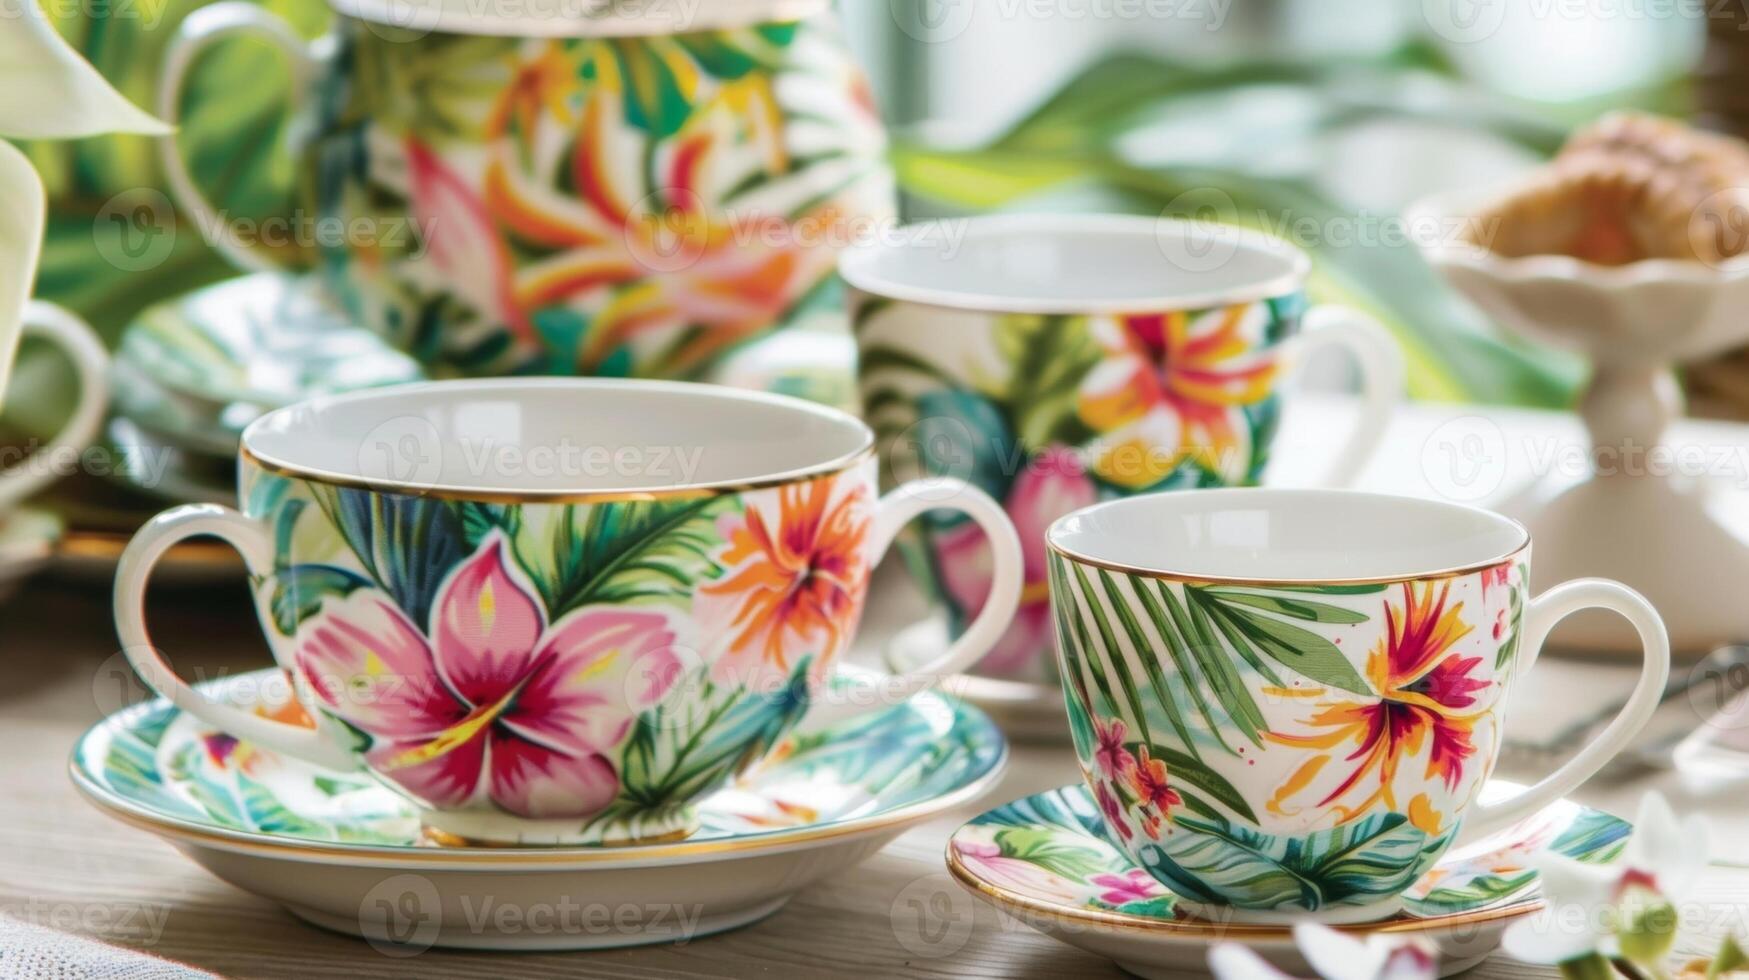 A charming setting of mismatched teacups and saucers each one featuring a tropical print adds a touch of whimsy to the tea party photo